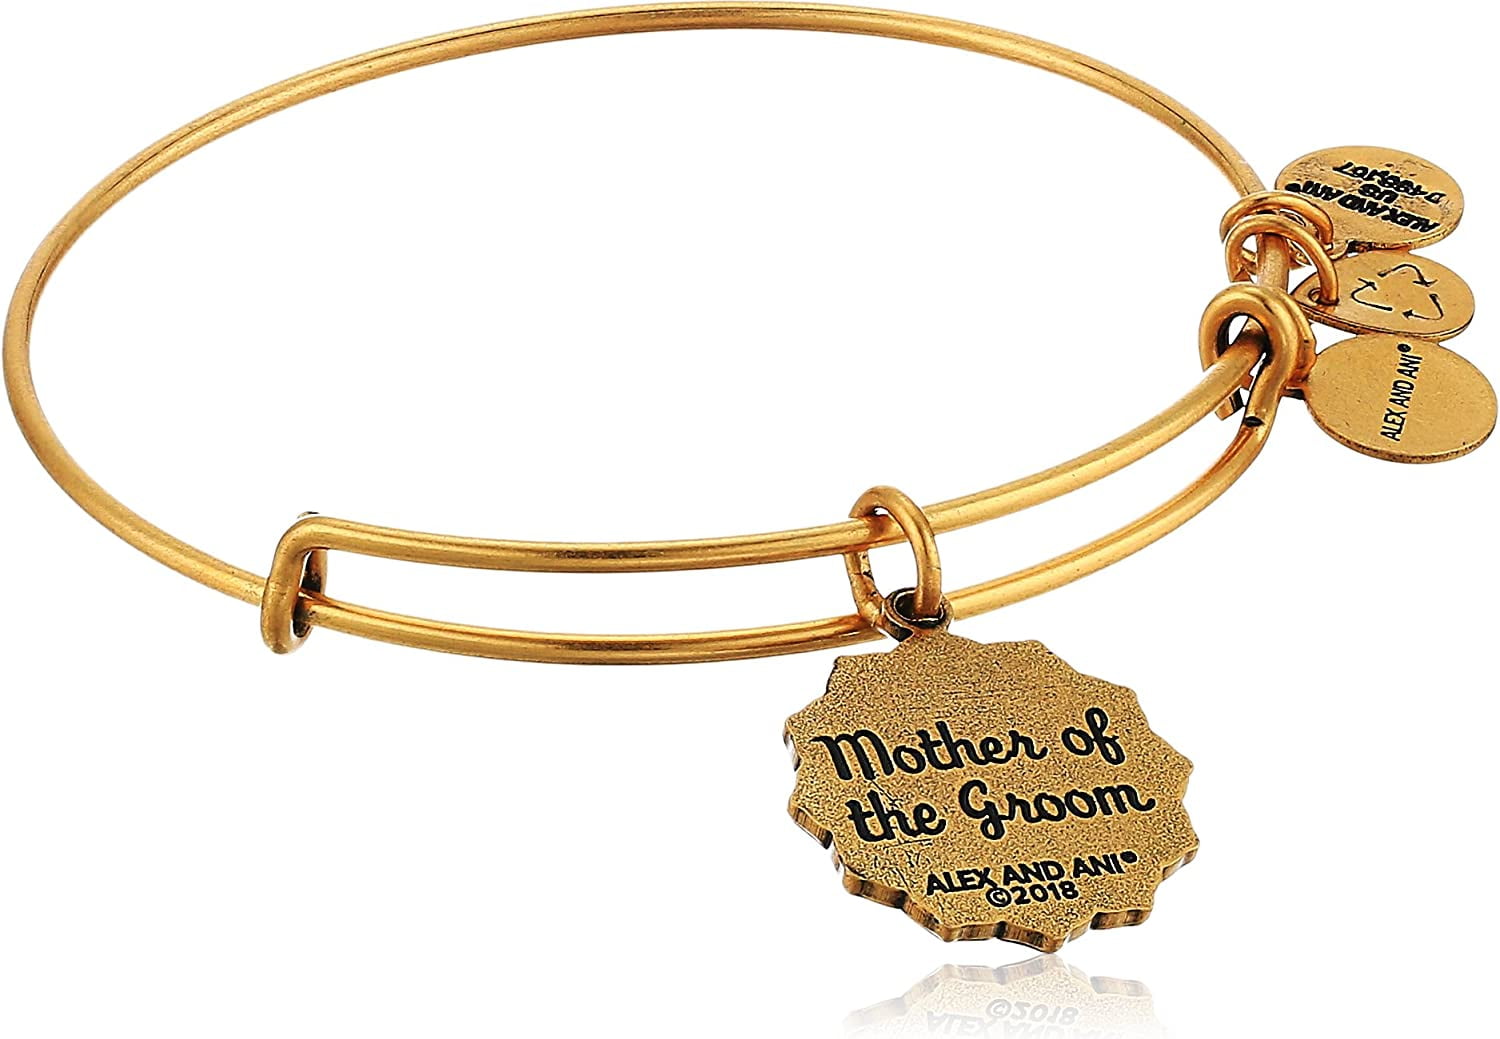 New Alex and Ani 'Hocus Pocus' Bracelet Available at Walt Disney World -  WDW News Today